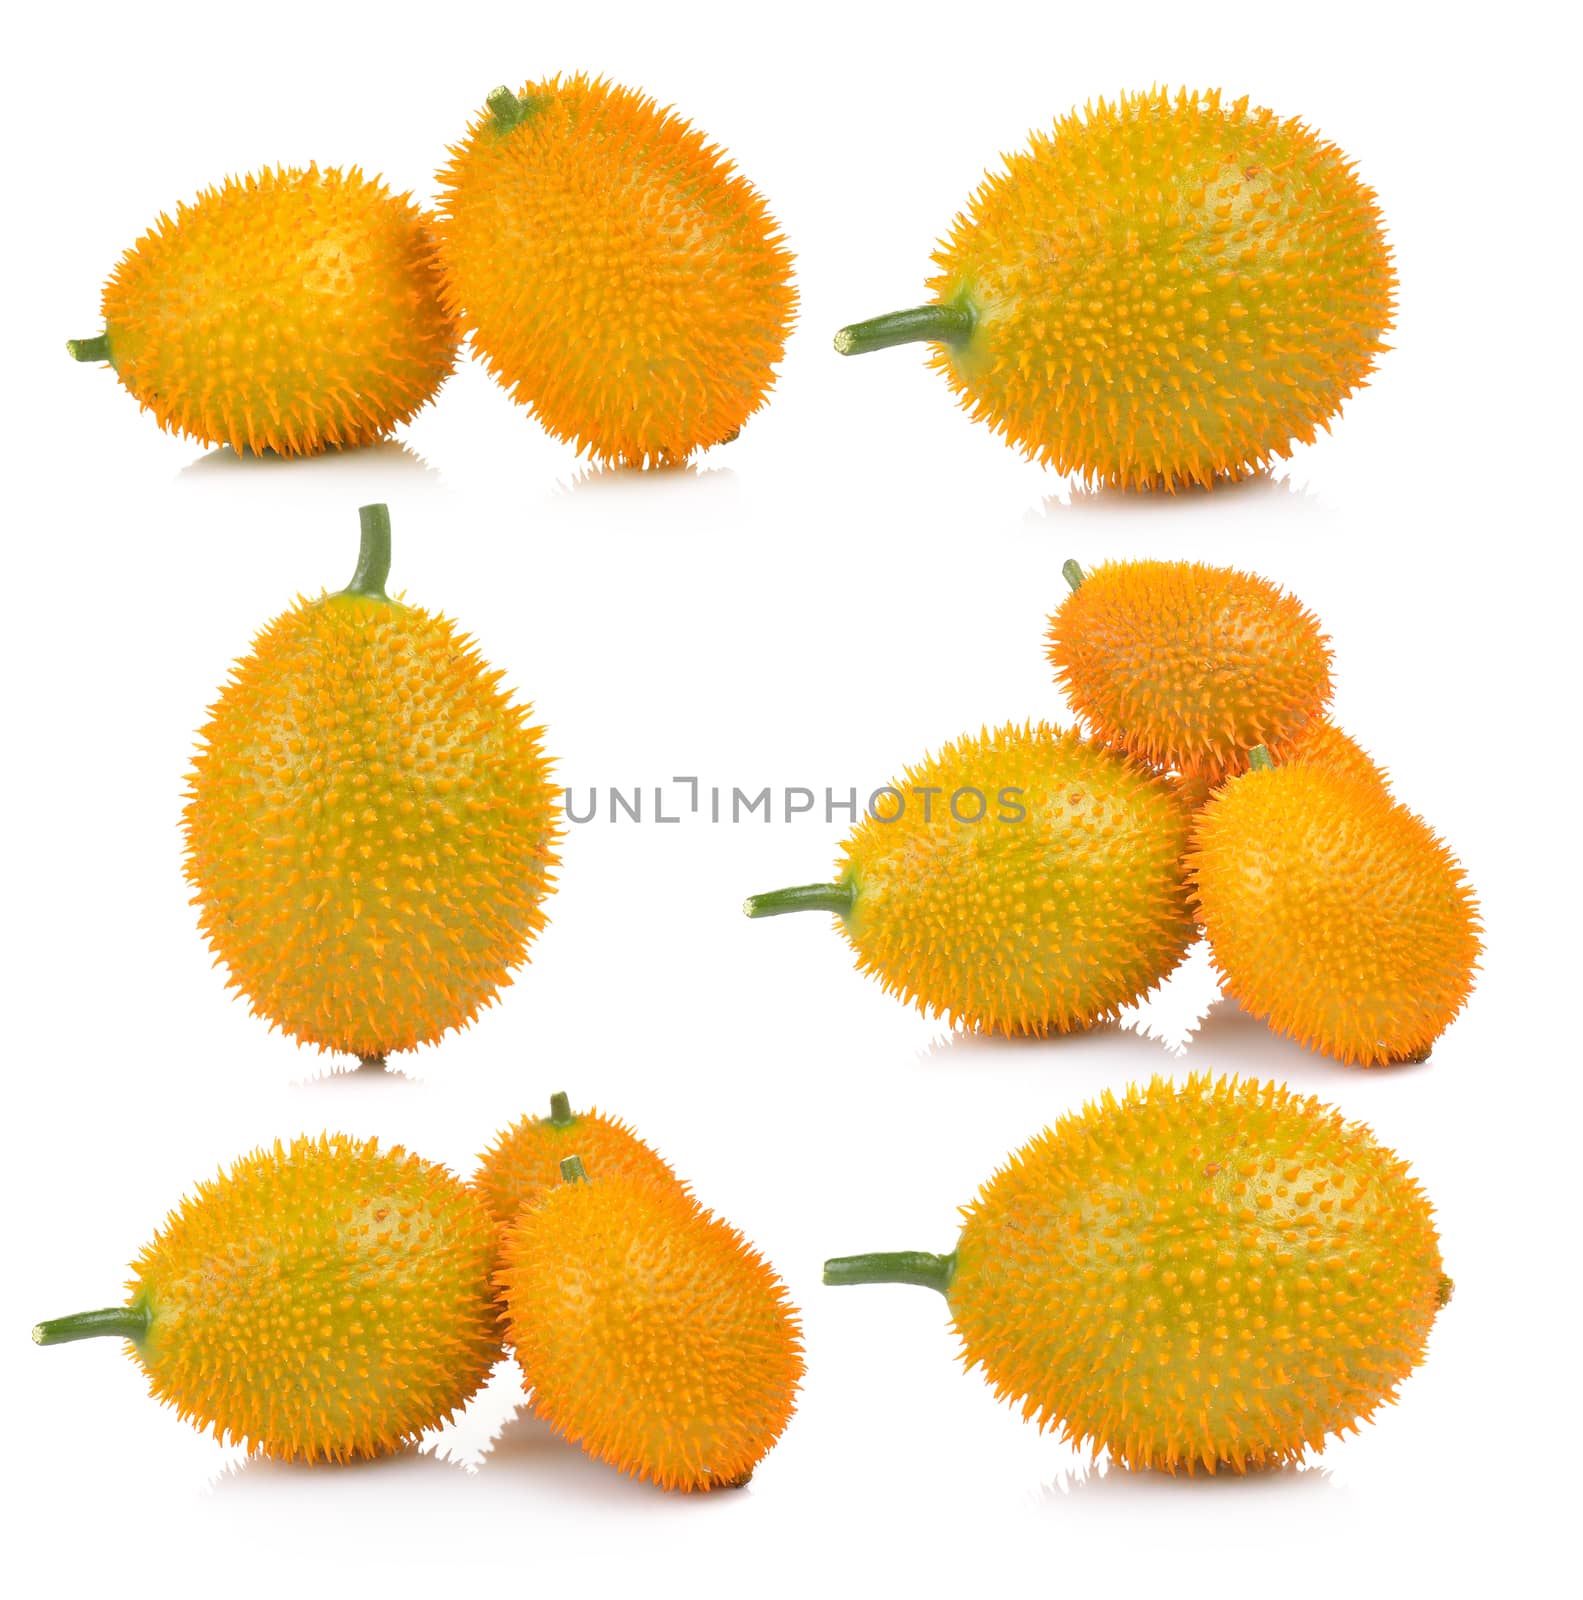 Baby Jackfruit, Spiny Bitter Gourd, Sweet Grourd or Cochinchin Gourd on white background